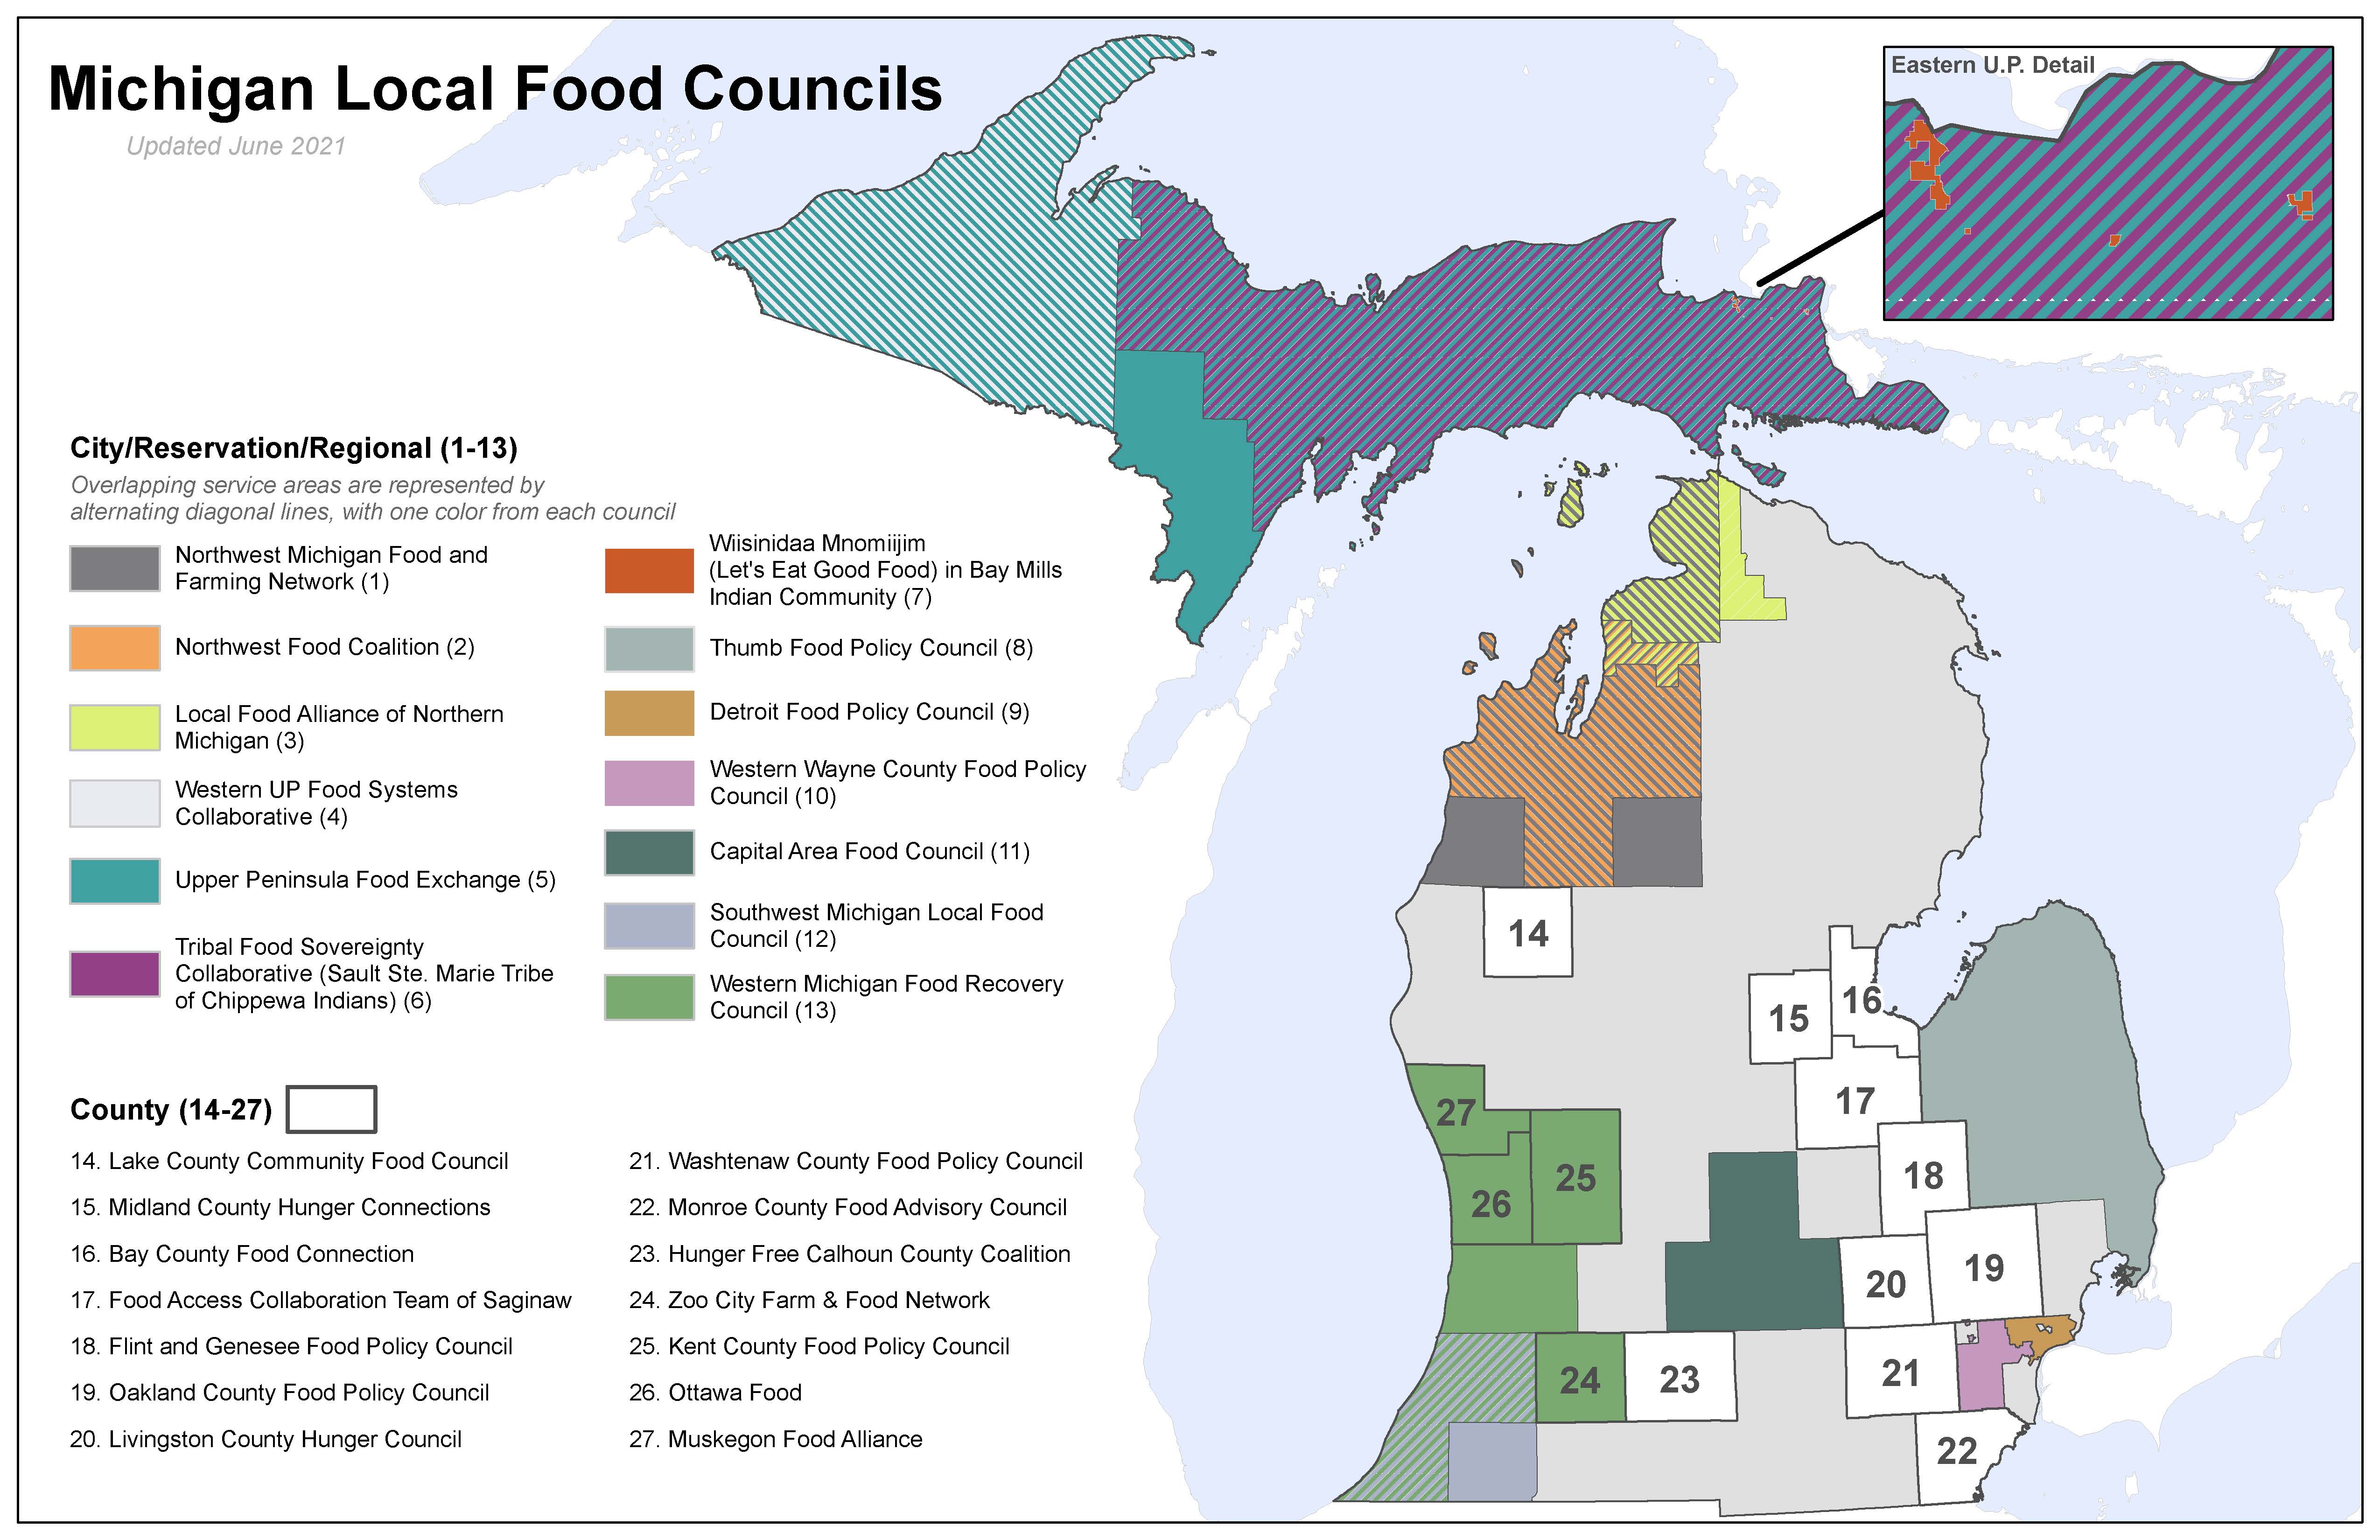 This map shows Michigan local food councils and their coverage area in the state.